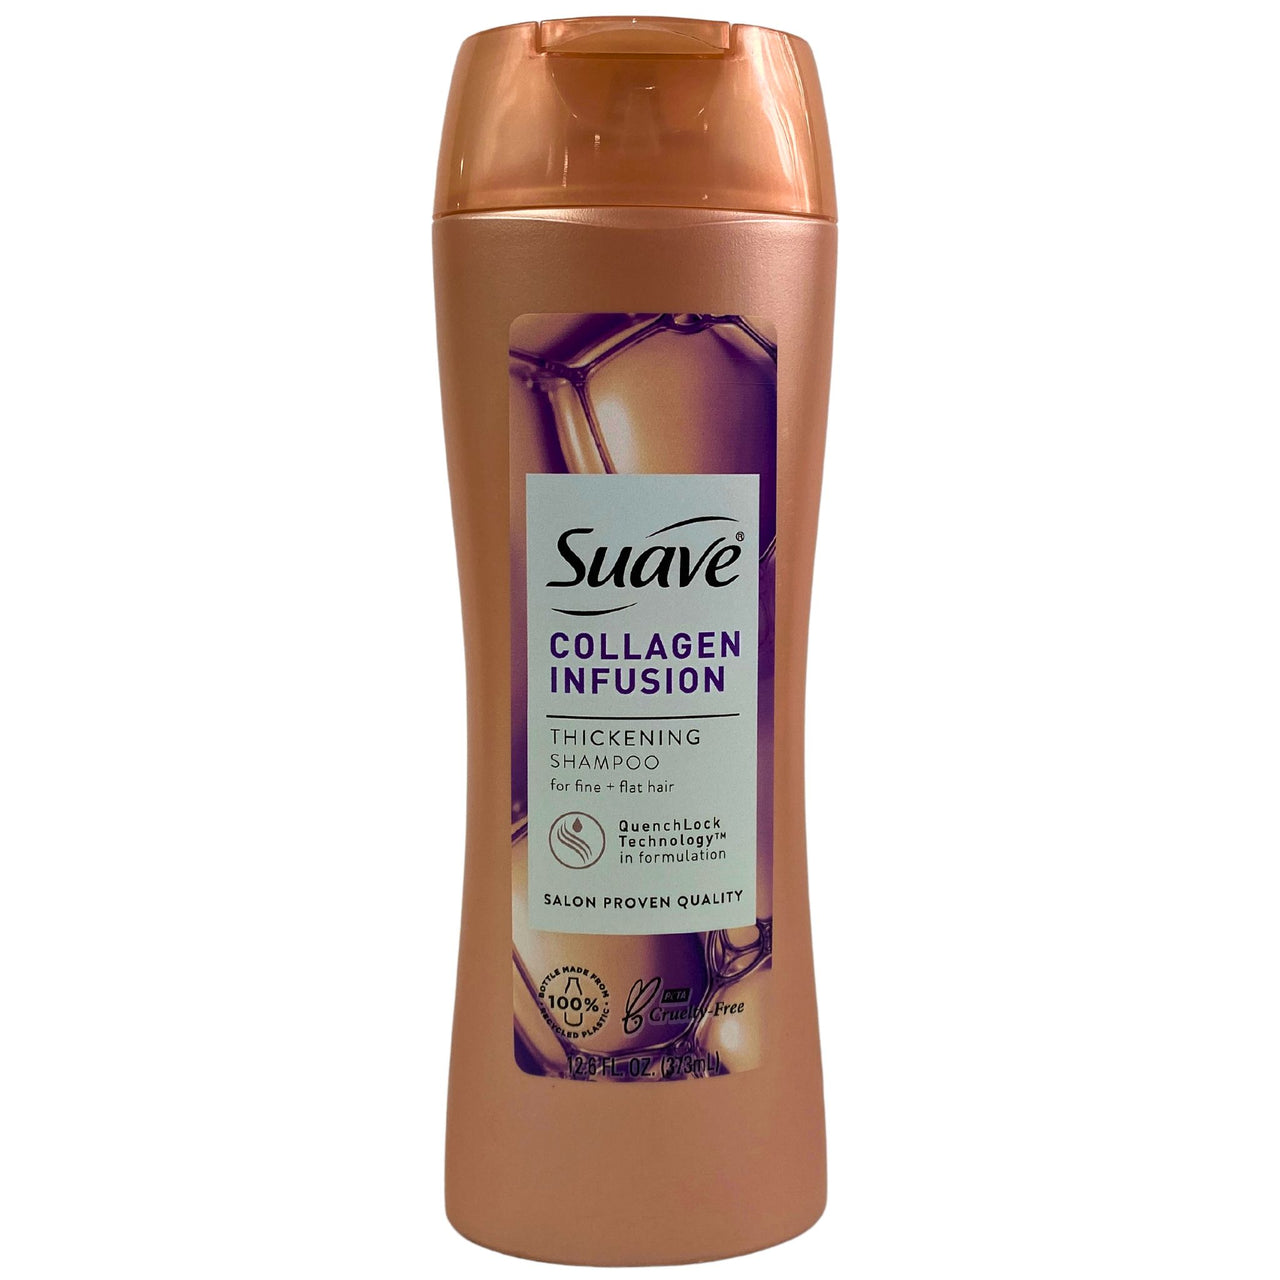 Suave Collagen Infusion Thickening Shampoo for Fine 